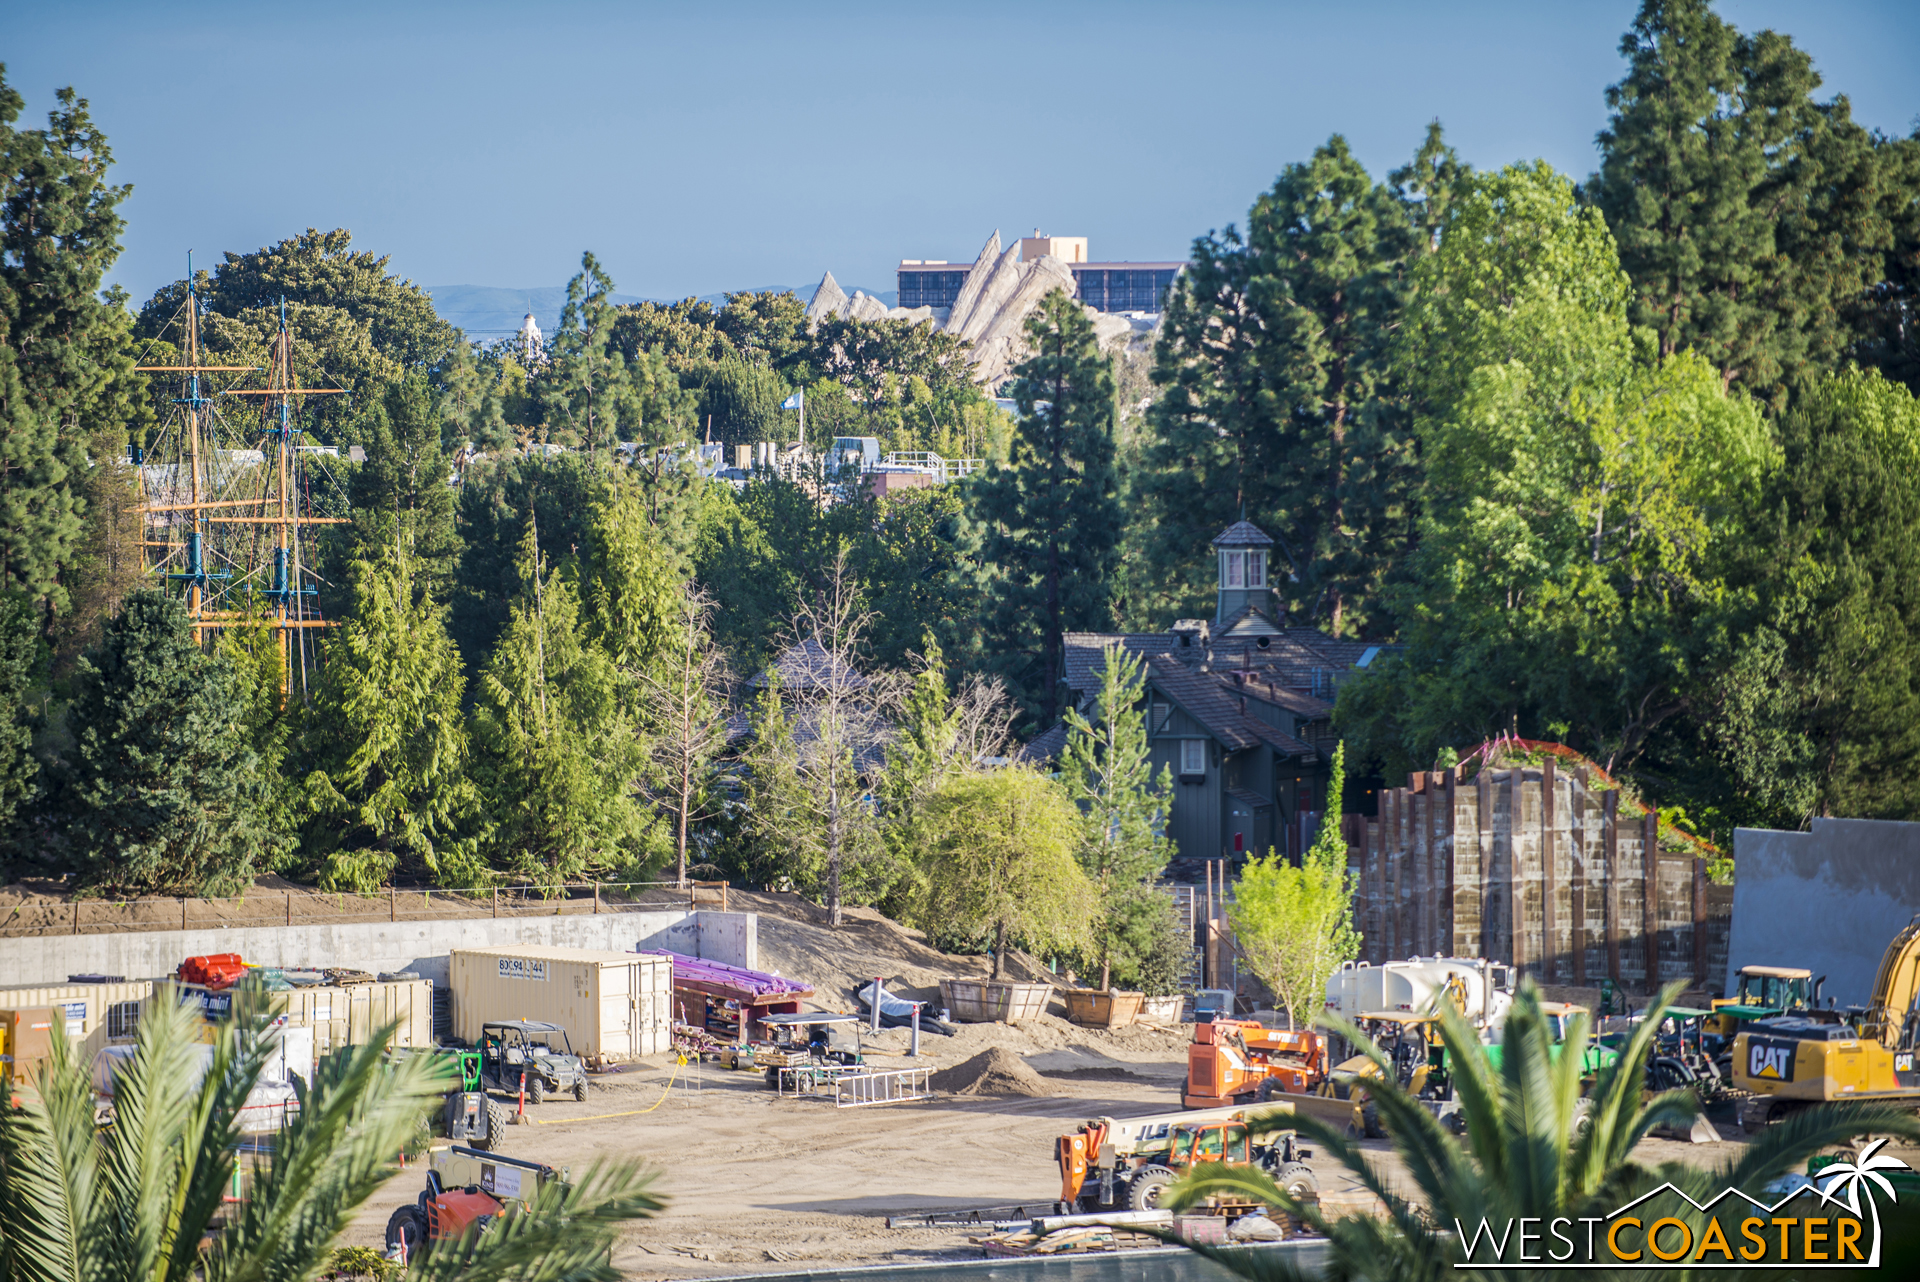  Over at the Hungry Bear side, any visibility of progress on the "back" entrance into "Star Wars" Land has been obscured by all those dang trees they've added to the raised berm that separates the Rivers of America from "Star Wars" Land. 